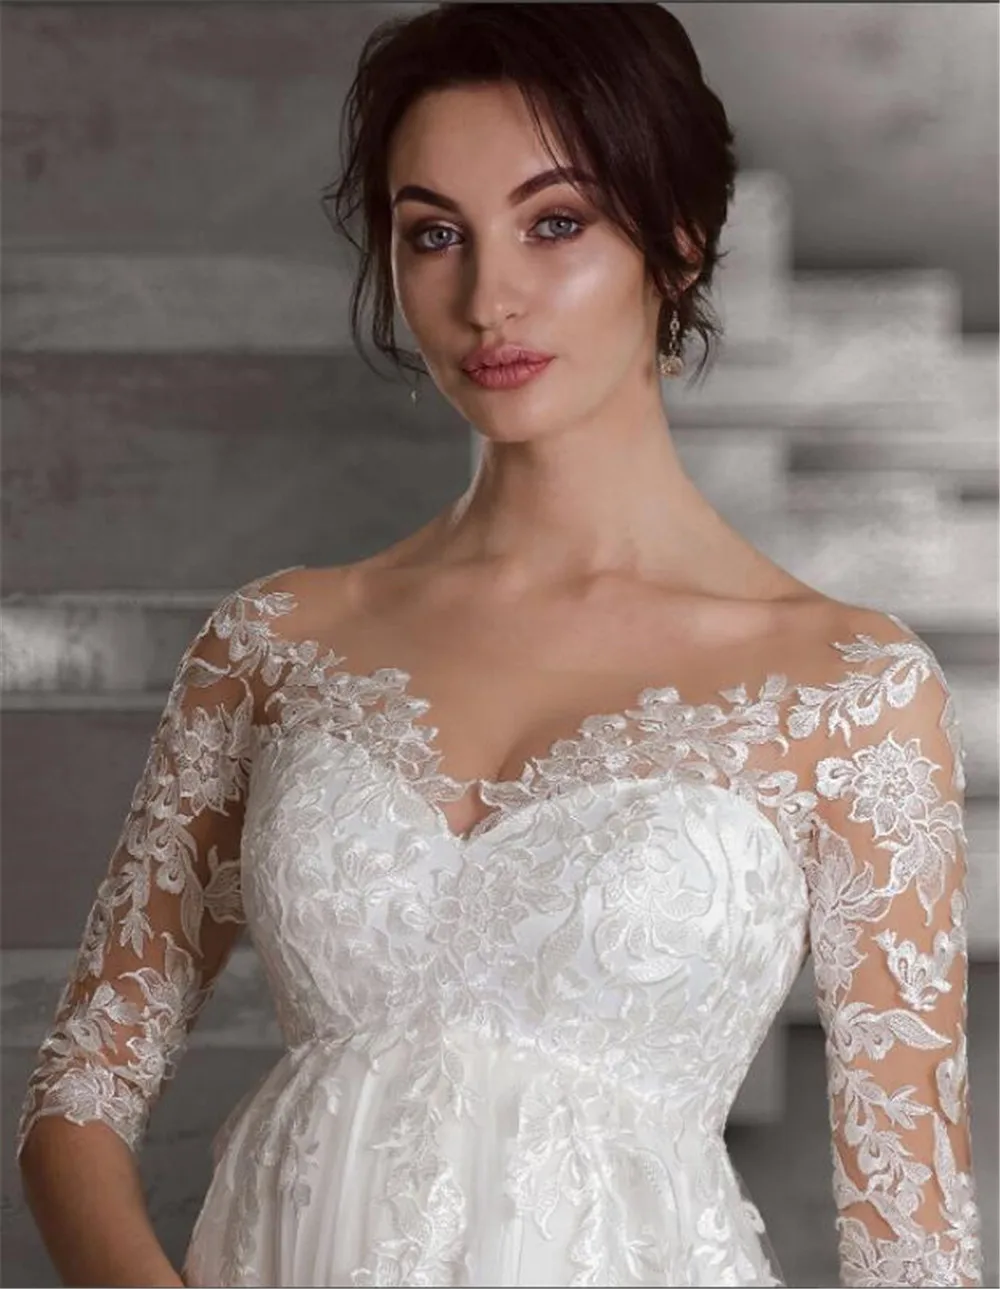 Thinyfull Empire Lace Wedding Dresses For Pregnant Woman Half Sleeves Sheer O-Neck Soft Tulle Maternity Bride Dress Plus Size 3